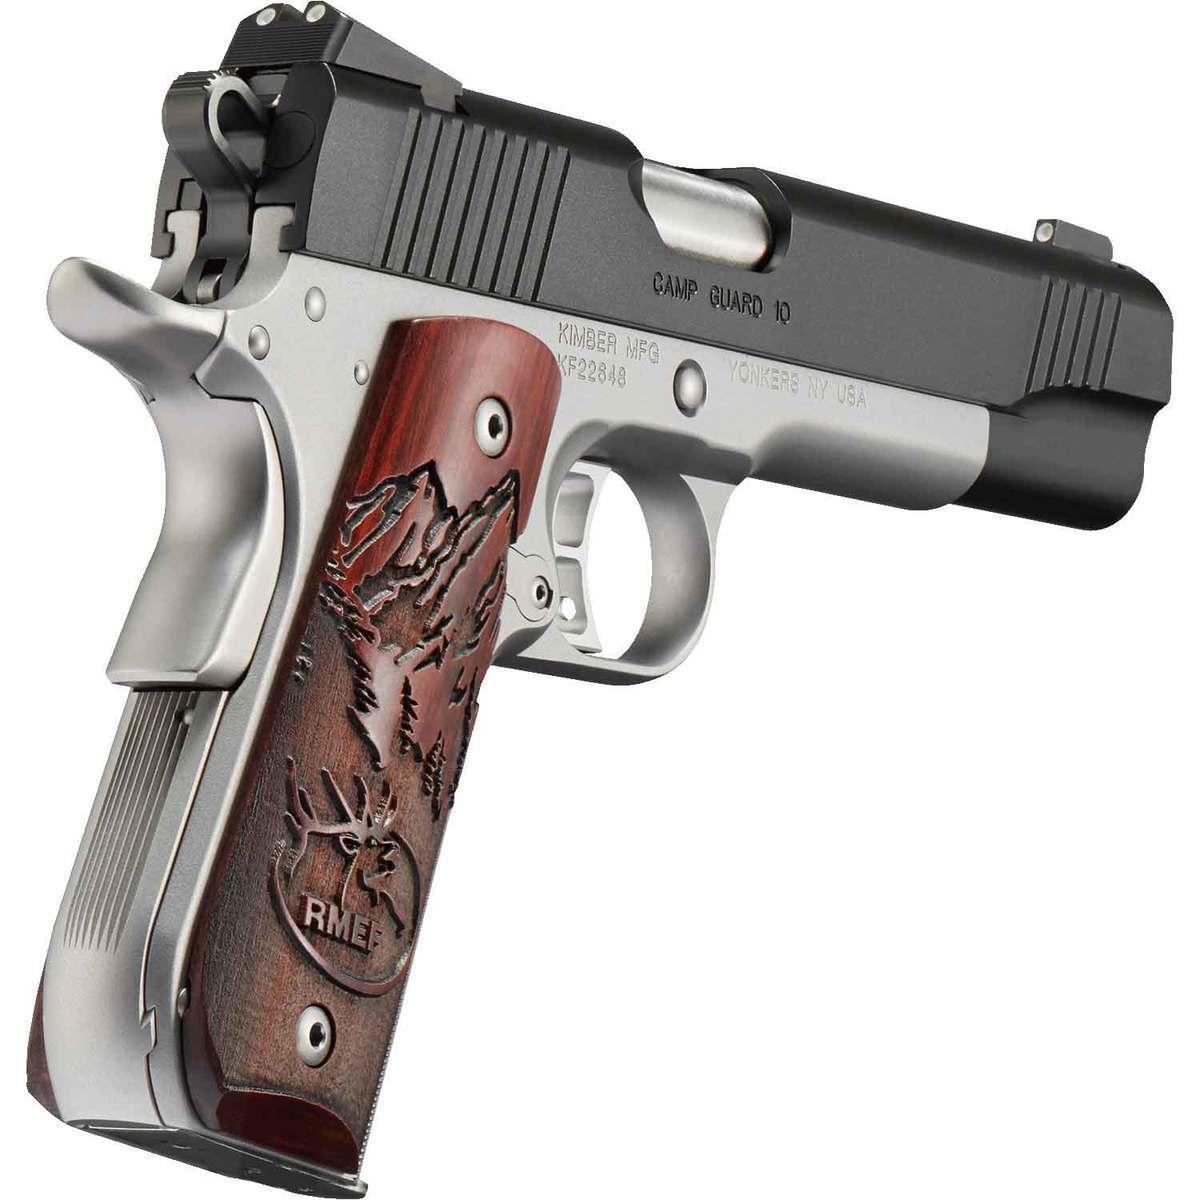 kimber-camp-guard-10mm-auto-5in-stainless-black-pistol-8-1-rounds-sportsman-s-warehouse